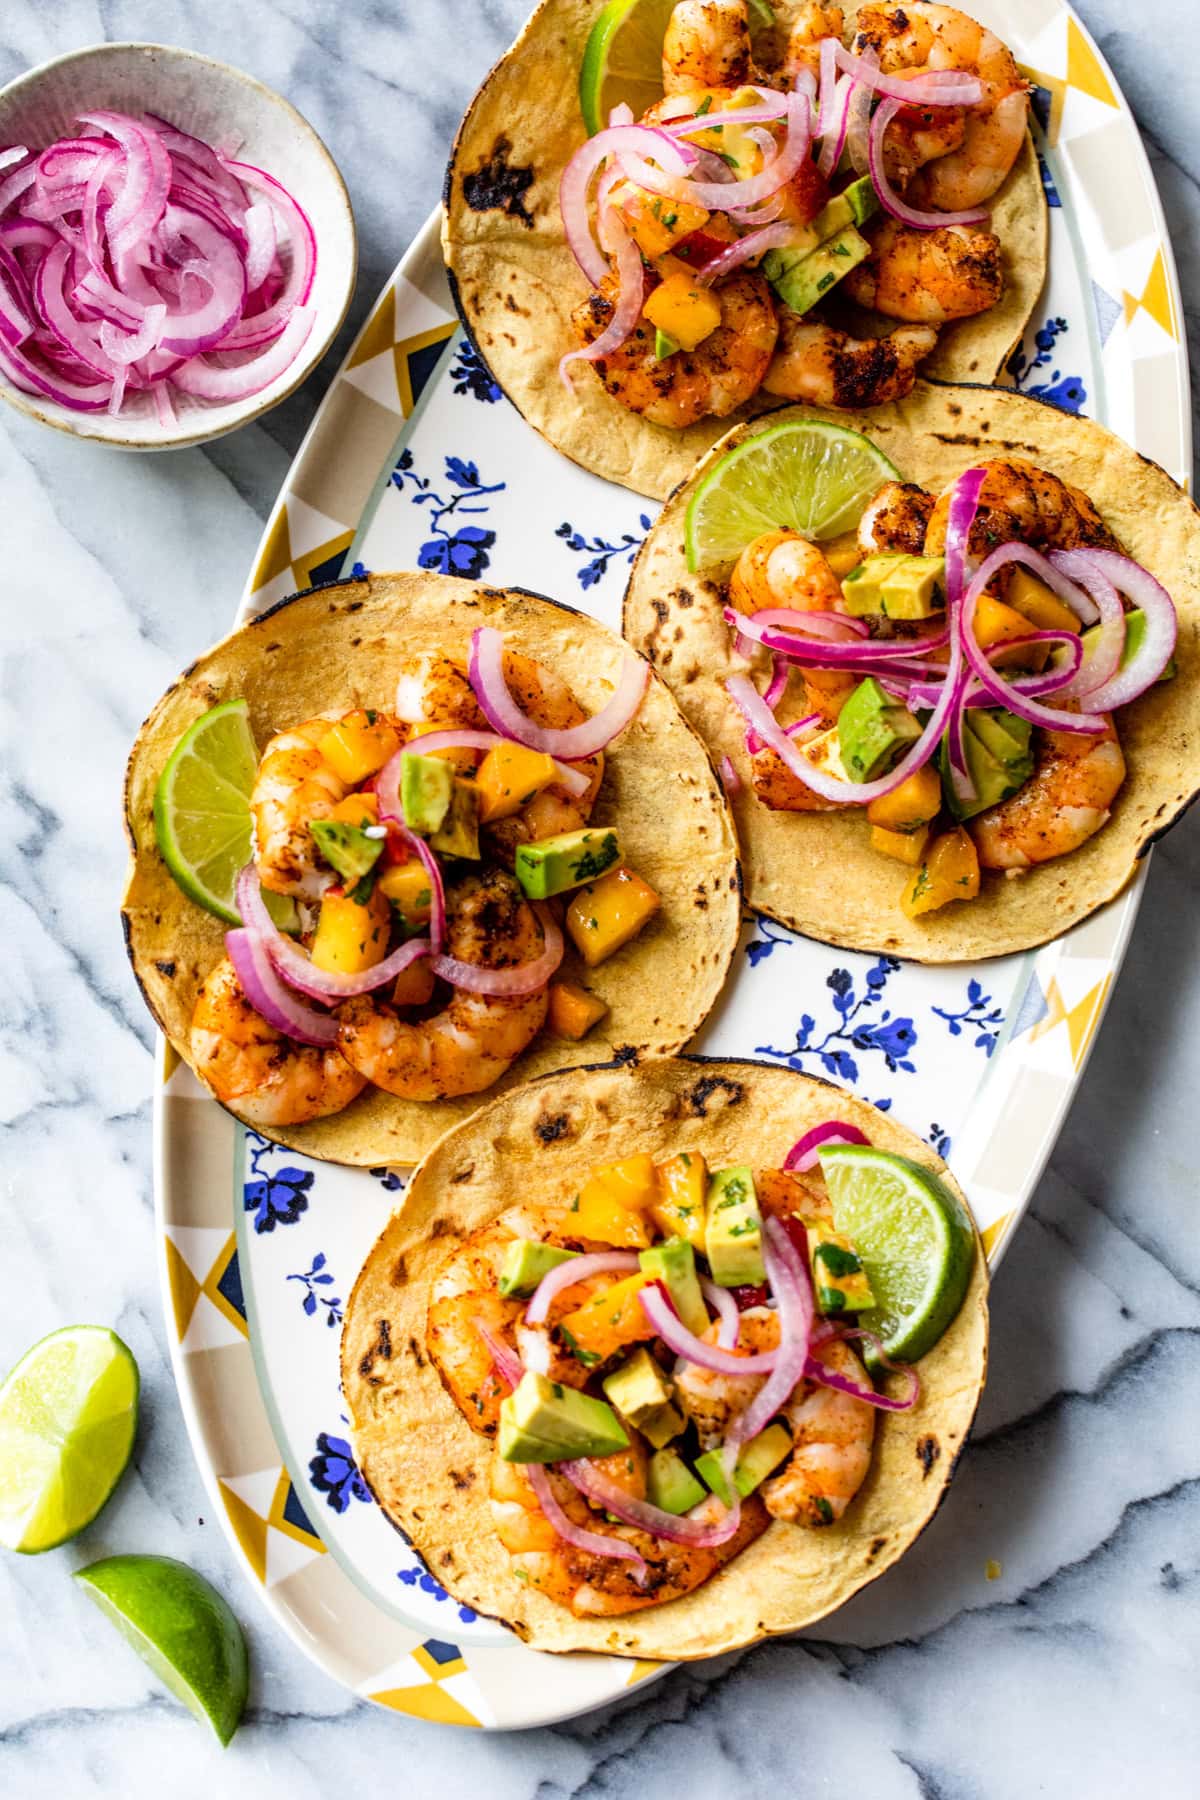 You are currently viewing Grilled Shrimp Tacos with Peach Salsa By Willfits.com